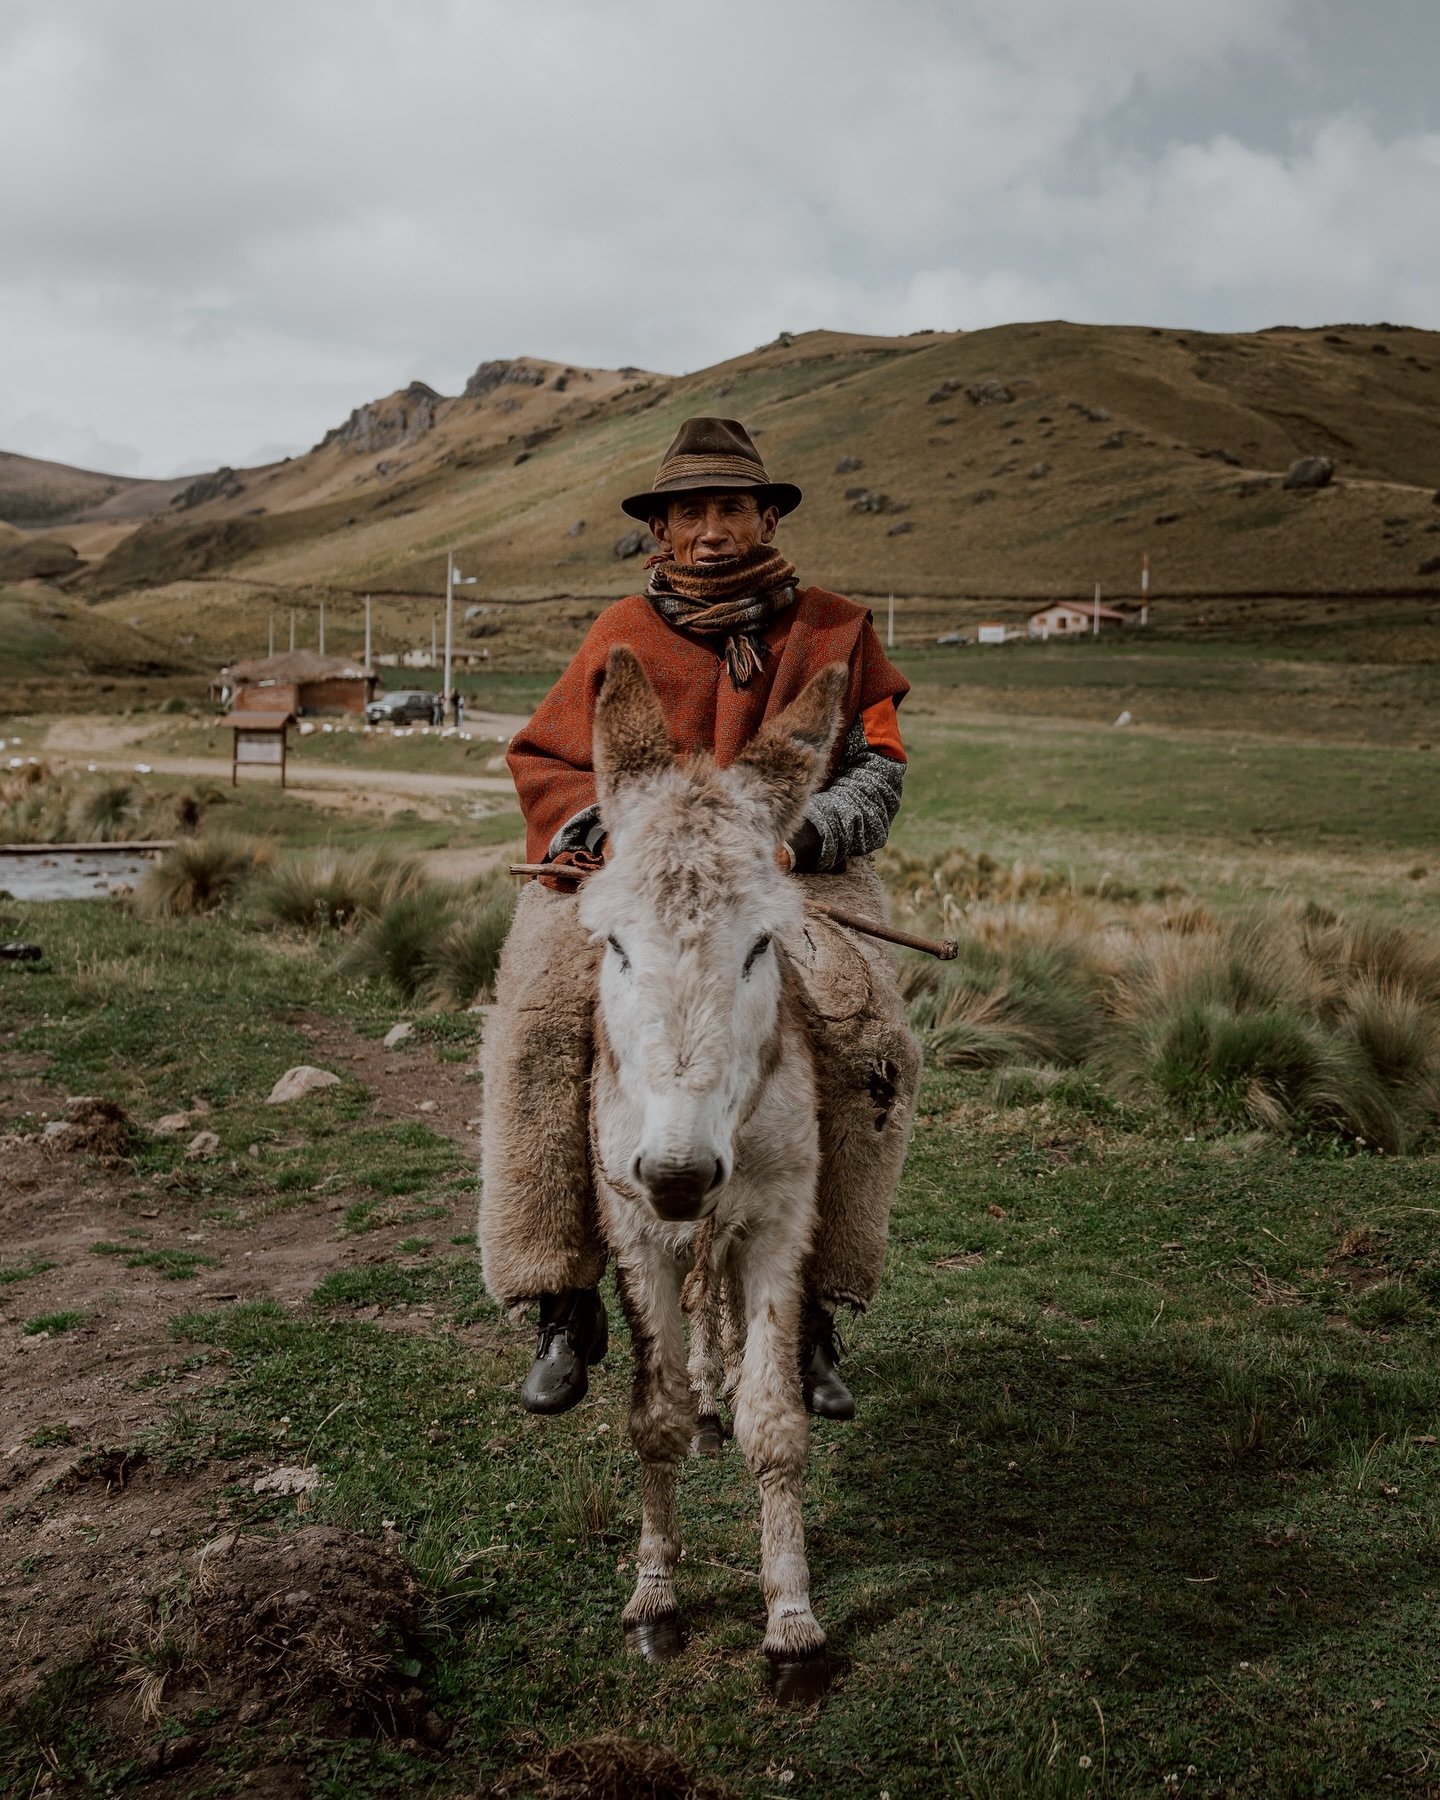 Alausi // Just a man on his horse in the middle of the Ecuadorian countryside.

This photo has been sitting in our &lsquo;to be posted&rsquo; folder for bloody ages but we couldn&rsquo;t decide if it was good enough to share.

But then we decided tha